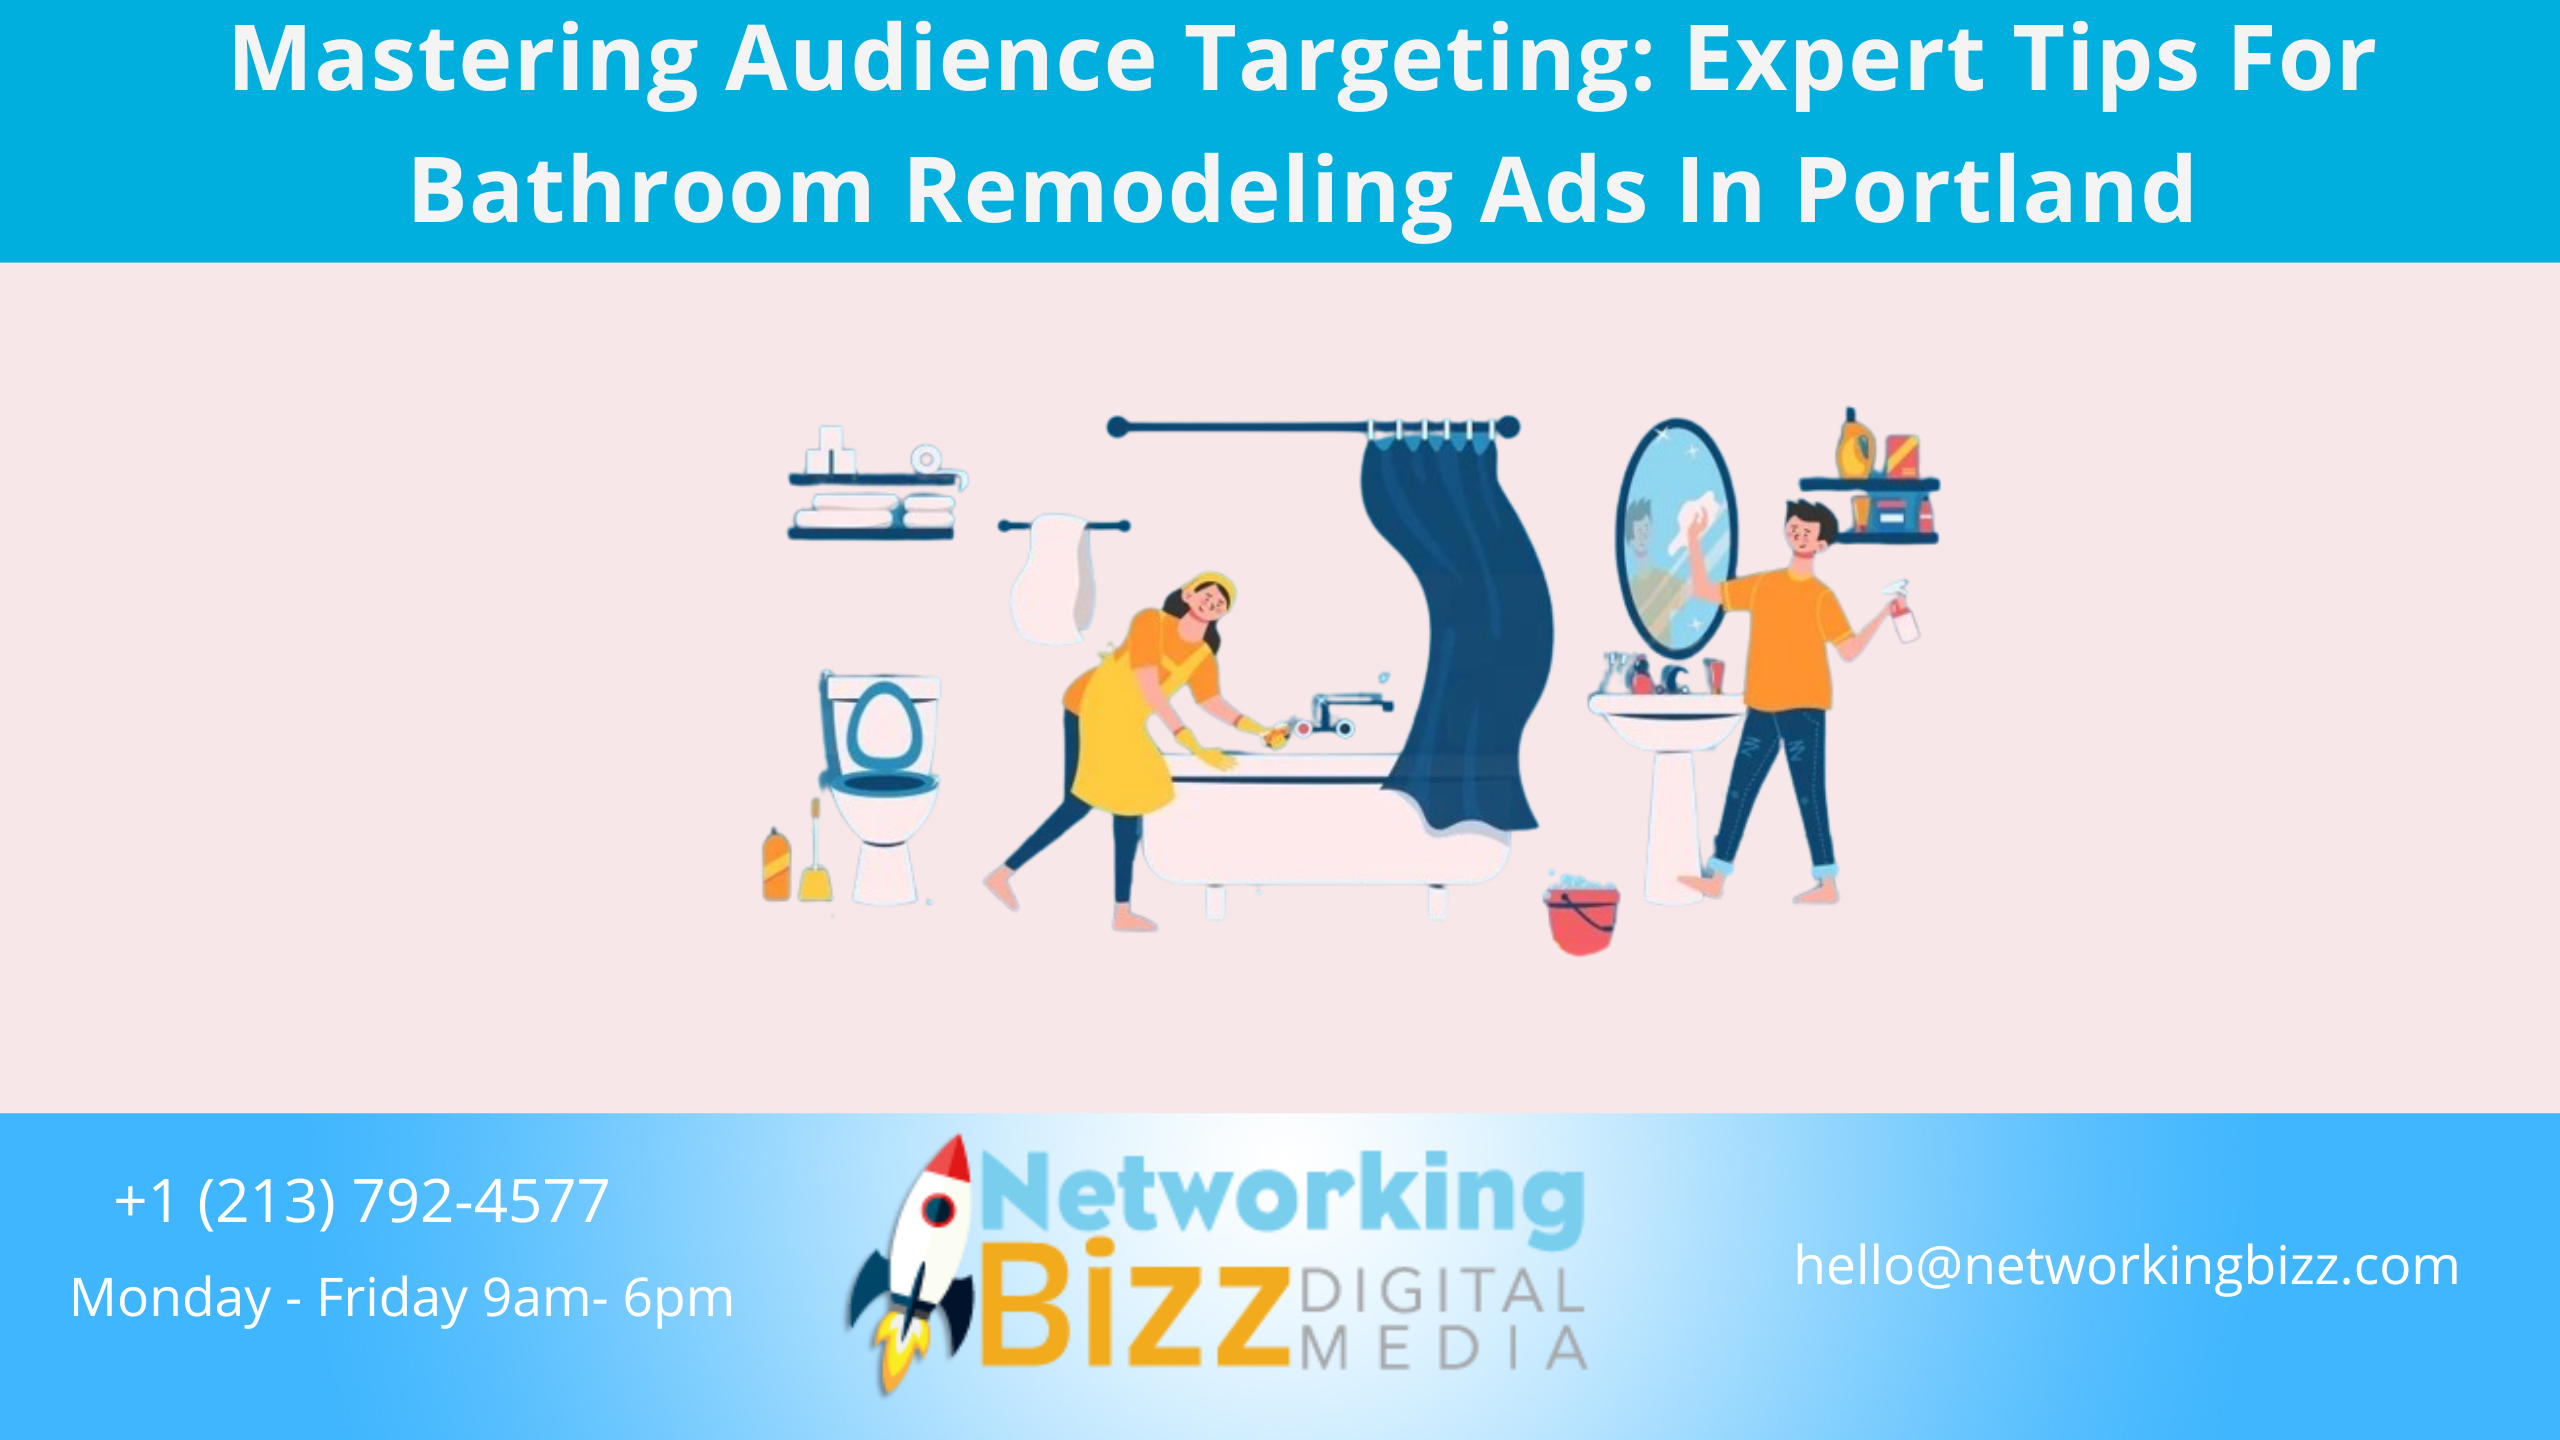 Mastering Audience Targeting: Expert Tips For Bathroom Remodeling Ads In Portland 